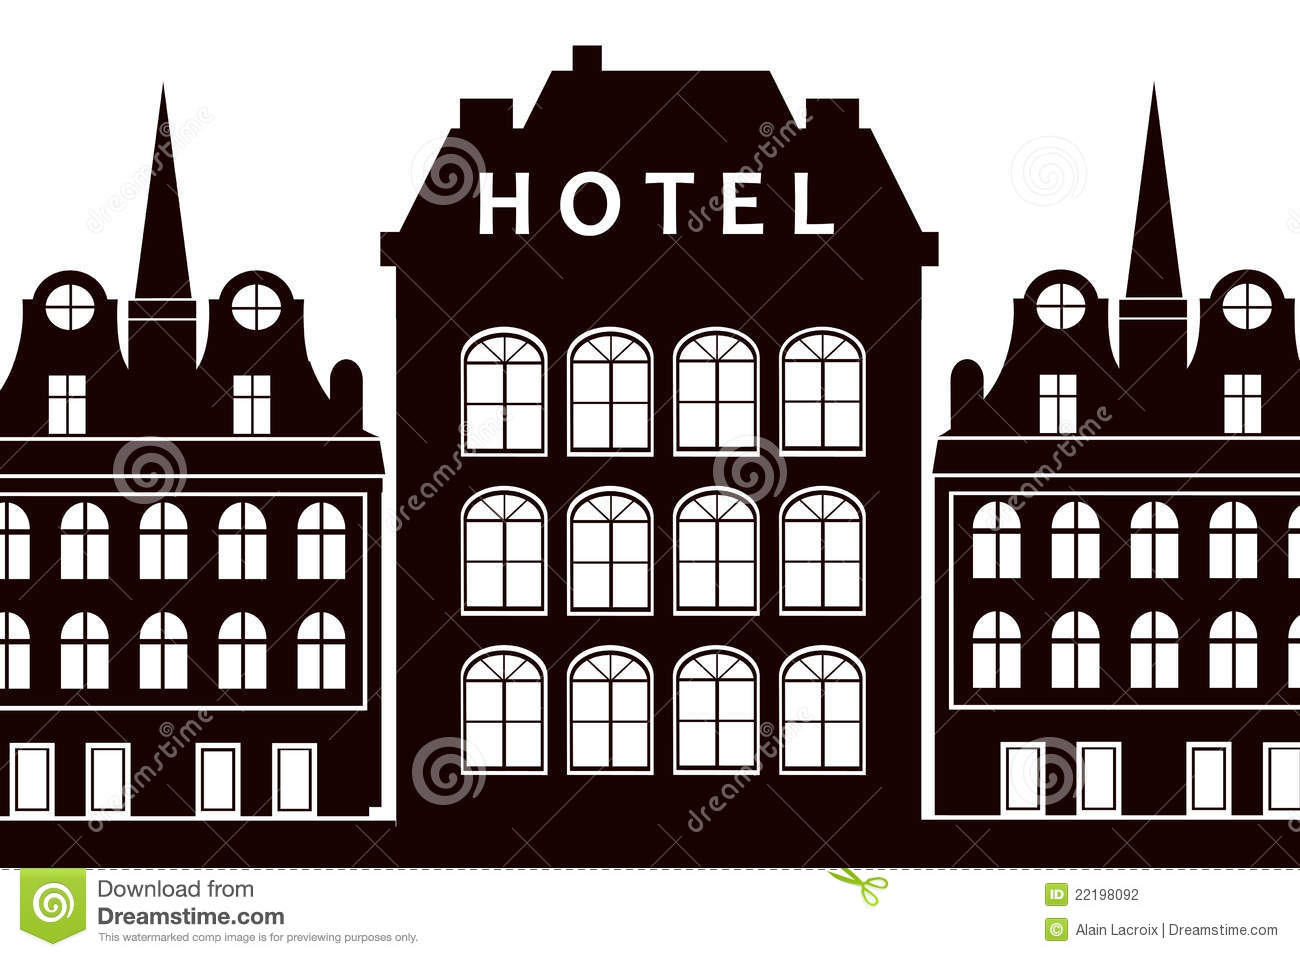 Hotel Clipart & Hotel Clip Art Images.